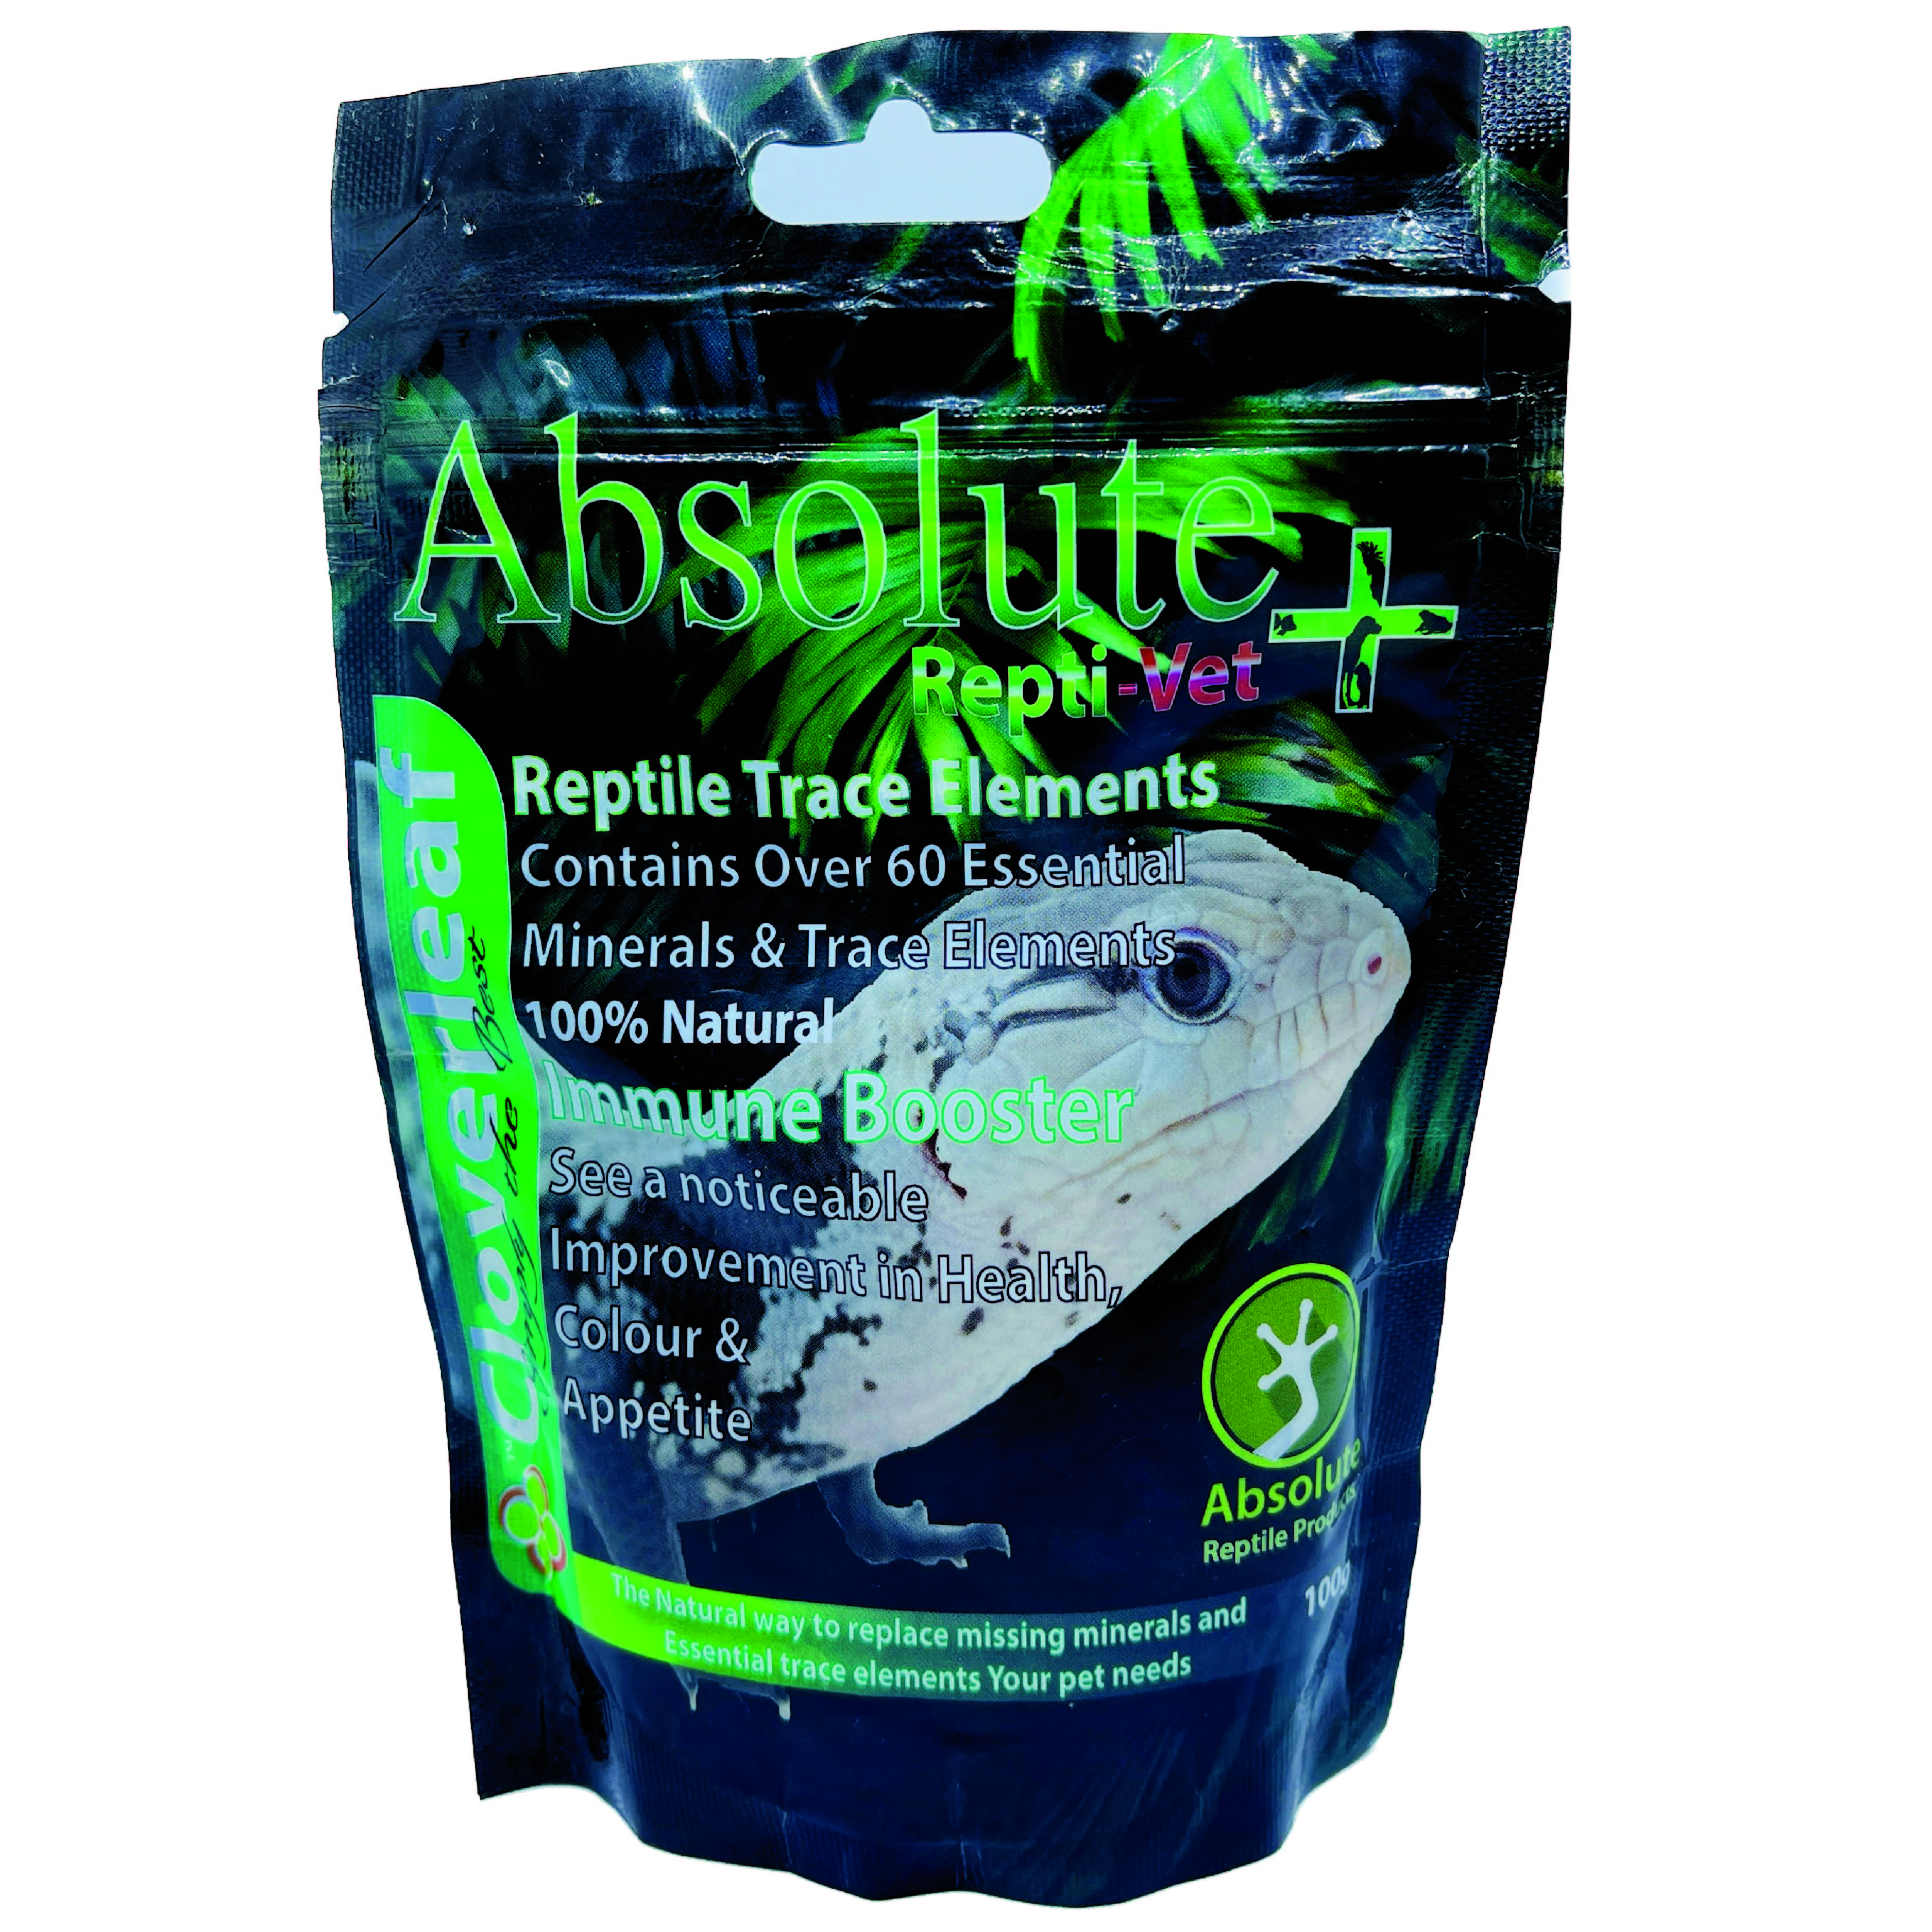 Cloverleaf ABSOLUTE+ Reptile Trace Elements Supplement100g